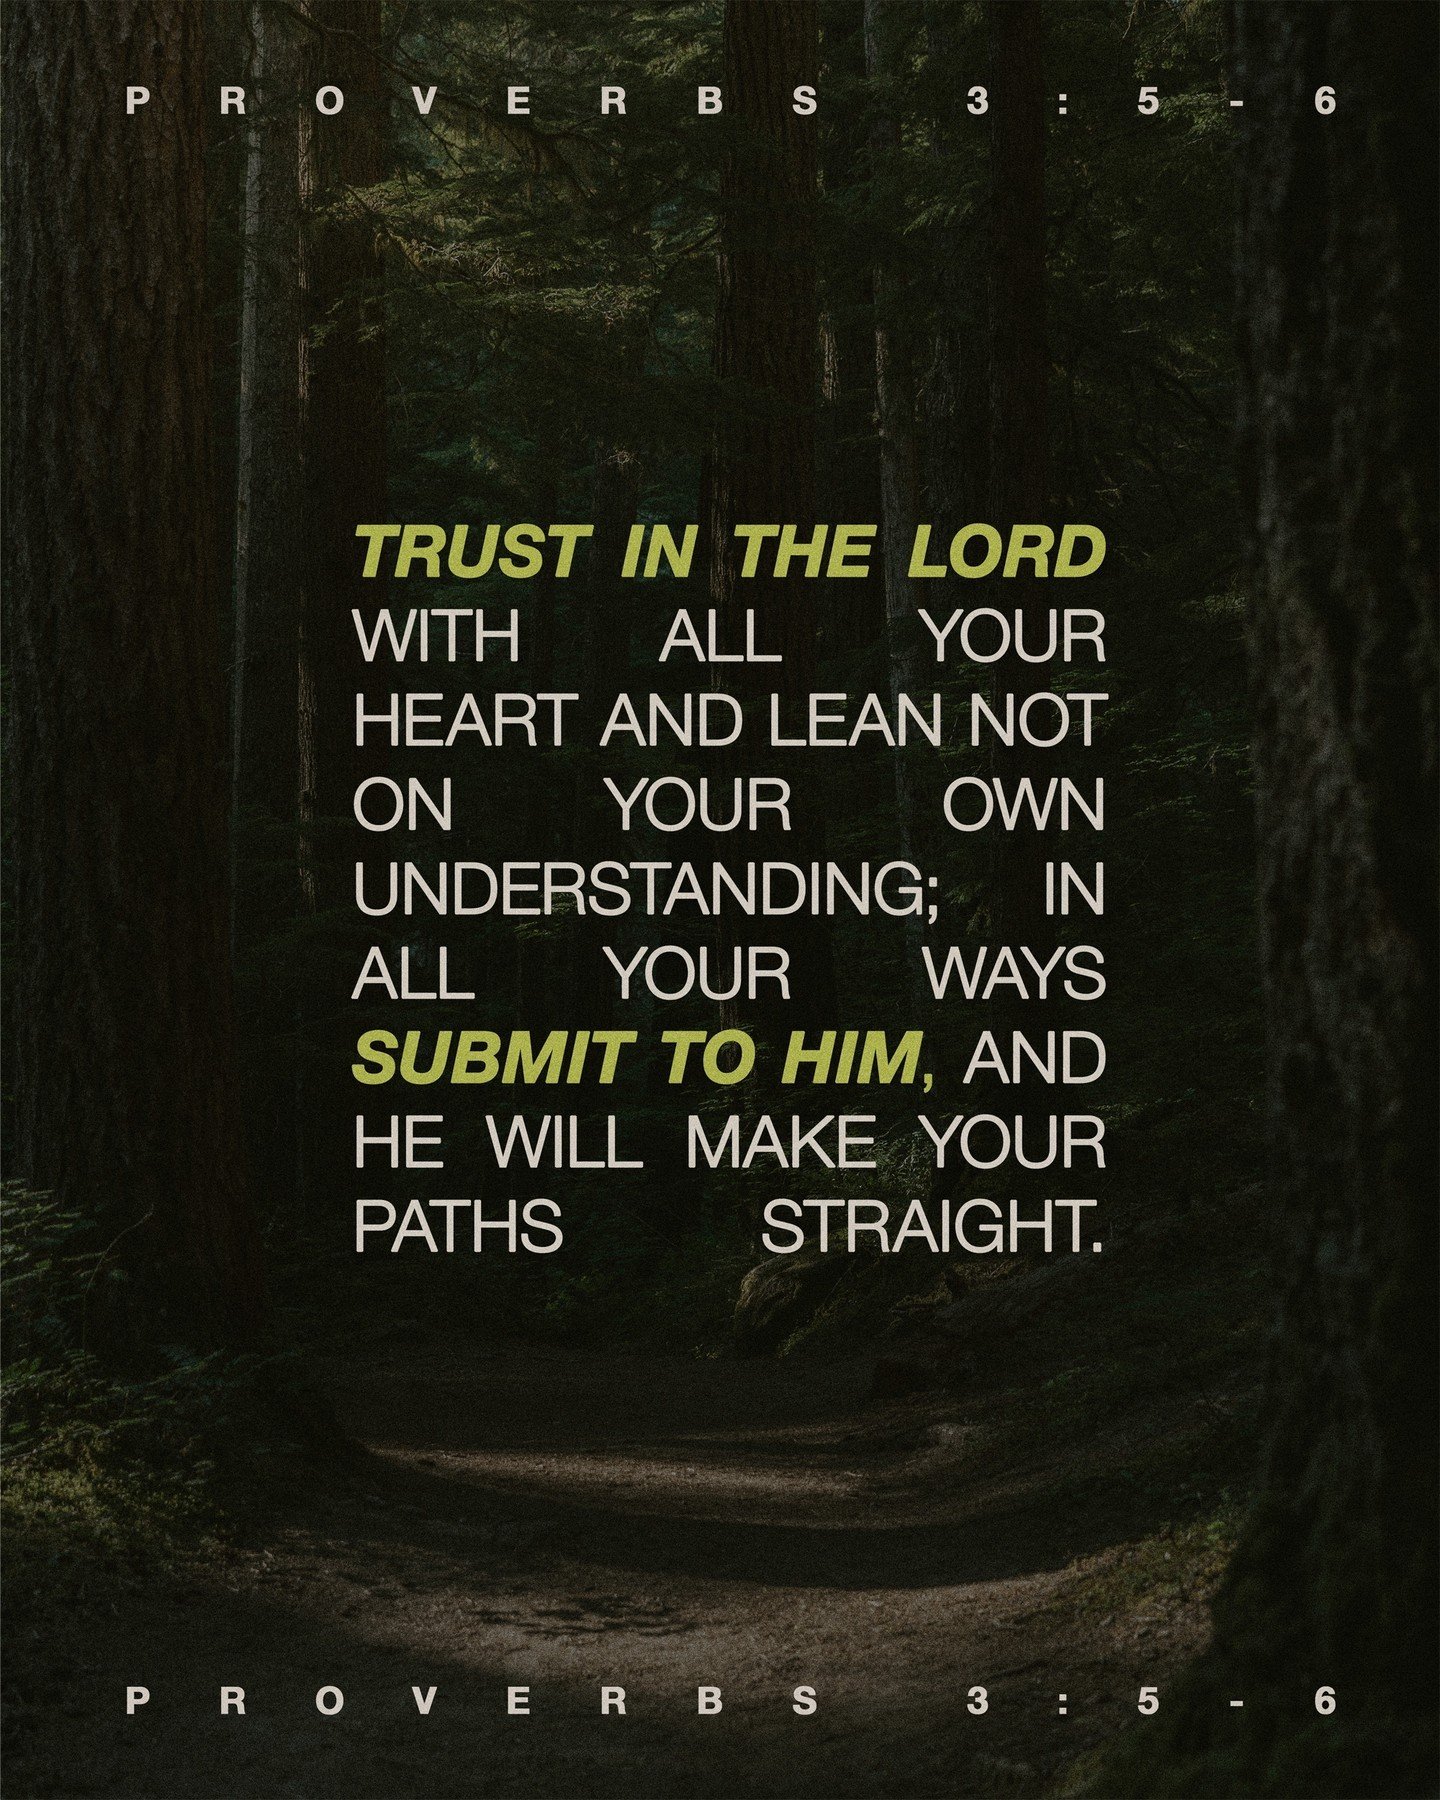 &quot;Trust in the Lord with all your heart and lean not on your own understanding; in all your ways submit to him, and he will make your paths straight.&quot; - Proverbs 3:5-6
.
.
.
#church #god #morning #jesus #christ #love #christian #worship #bib